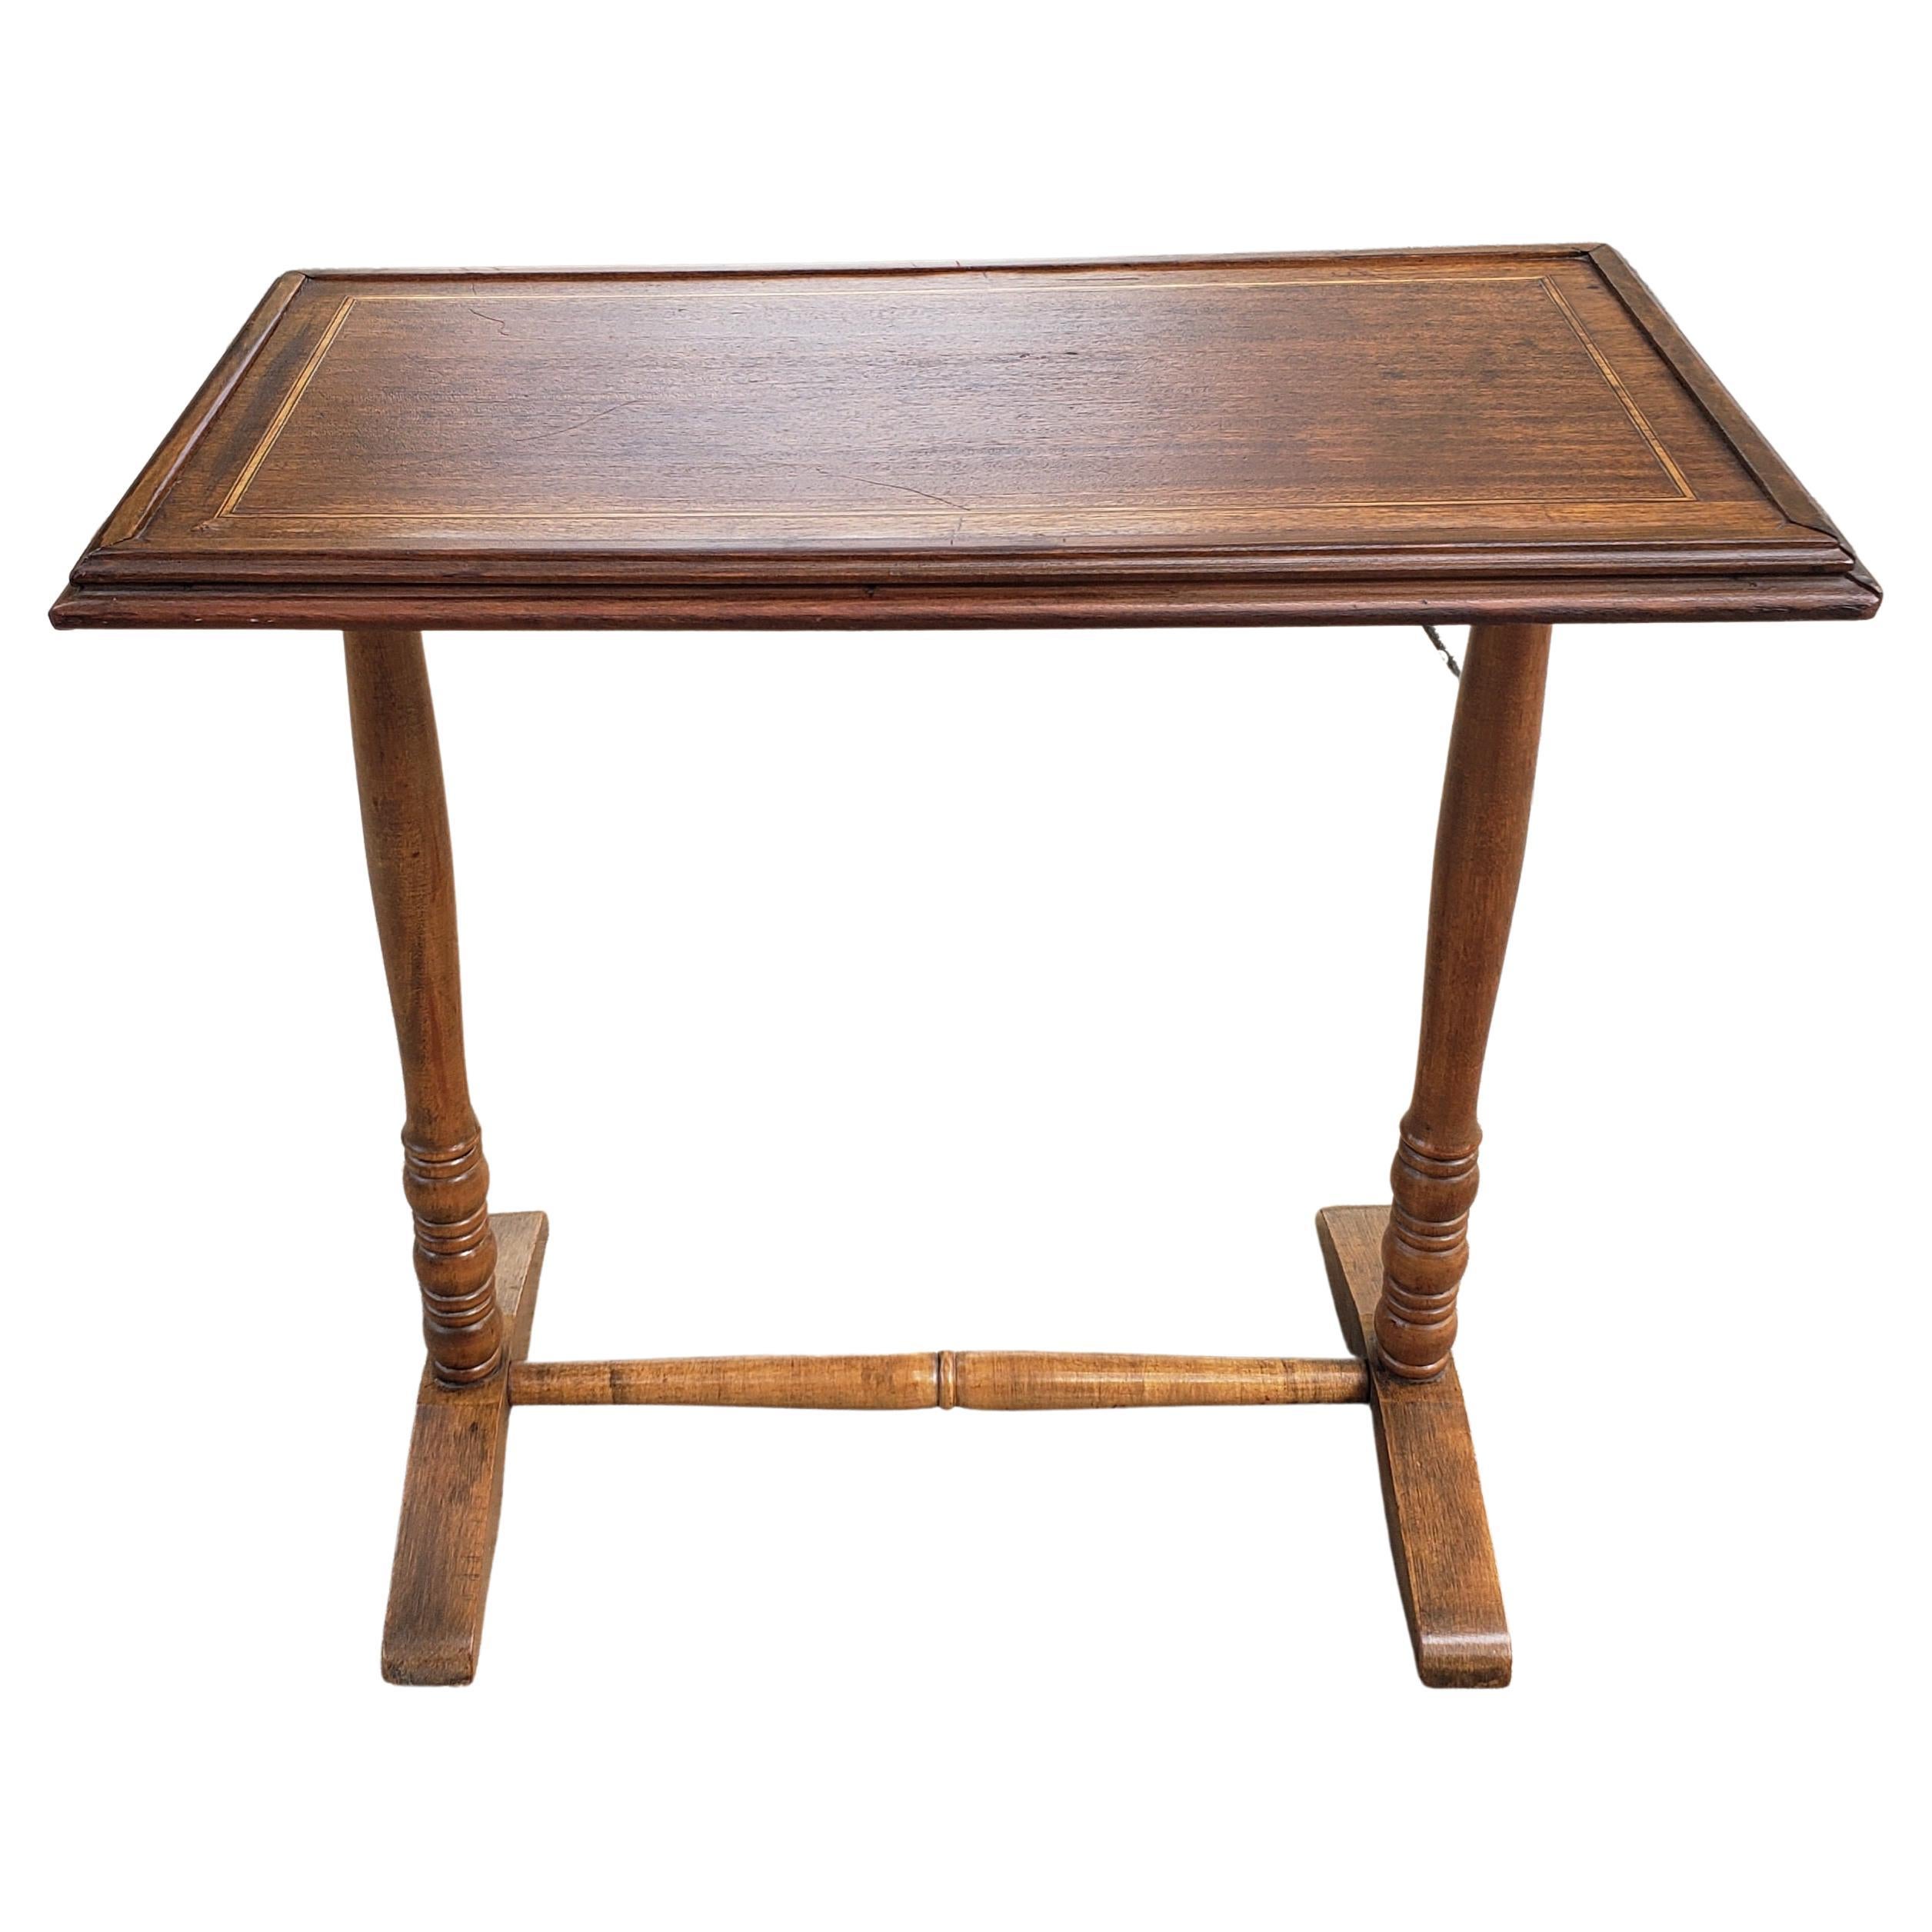 Vintage Maple, Mahogany and Satinwood Inlays Small Trestle Table For Sale